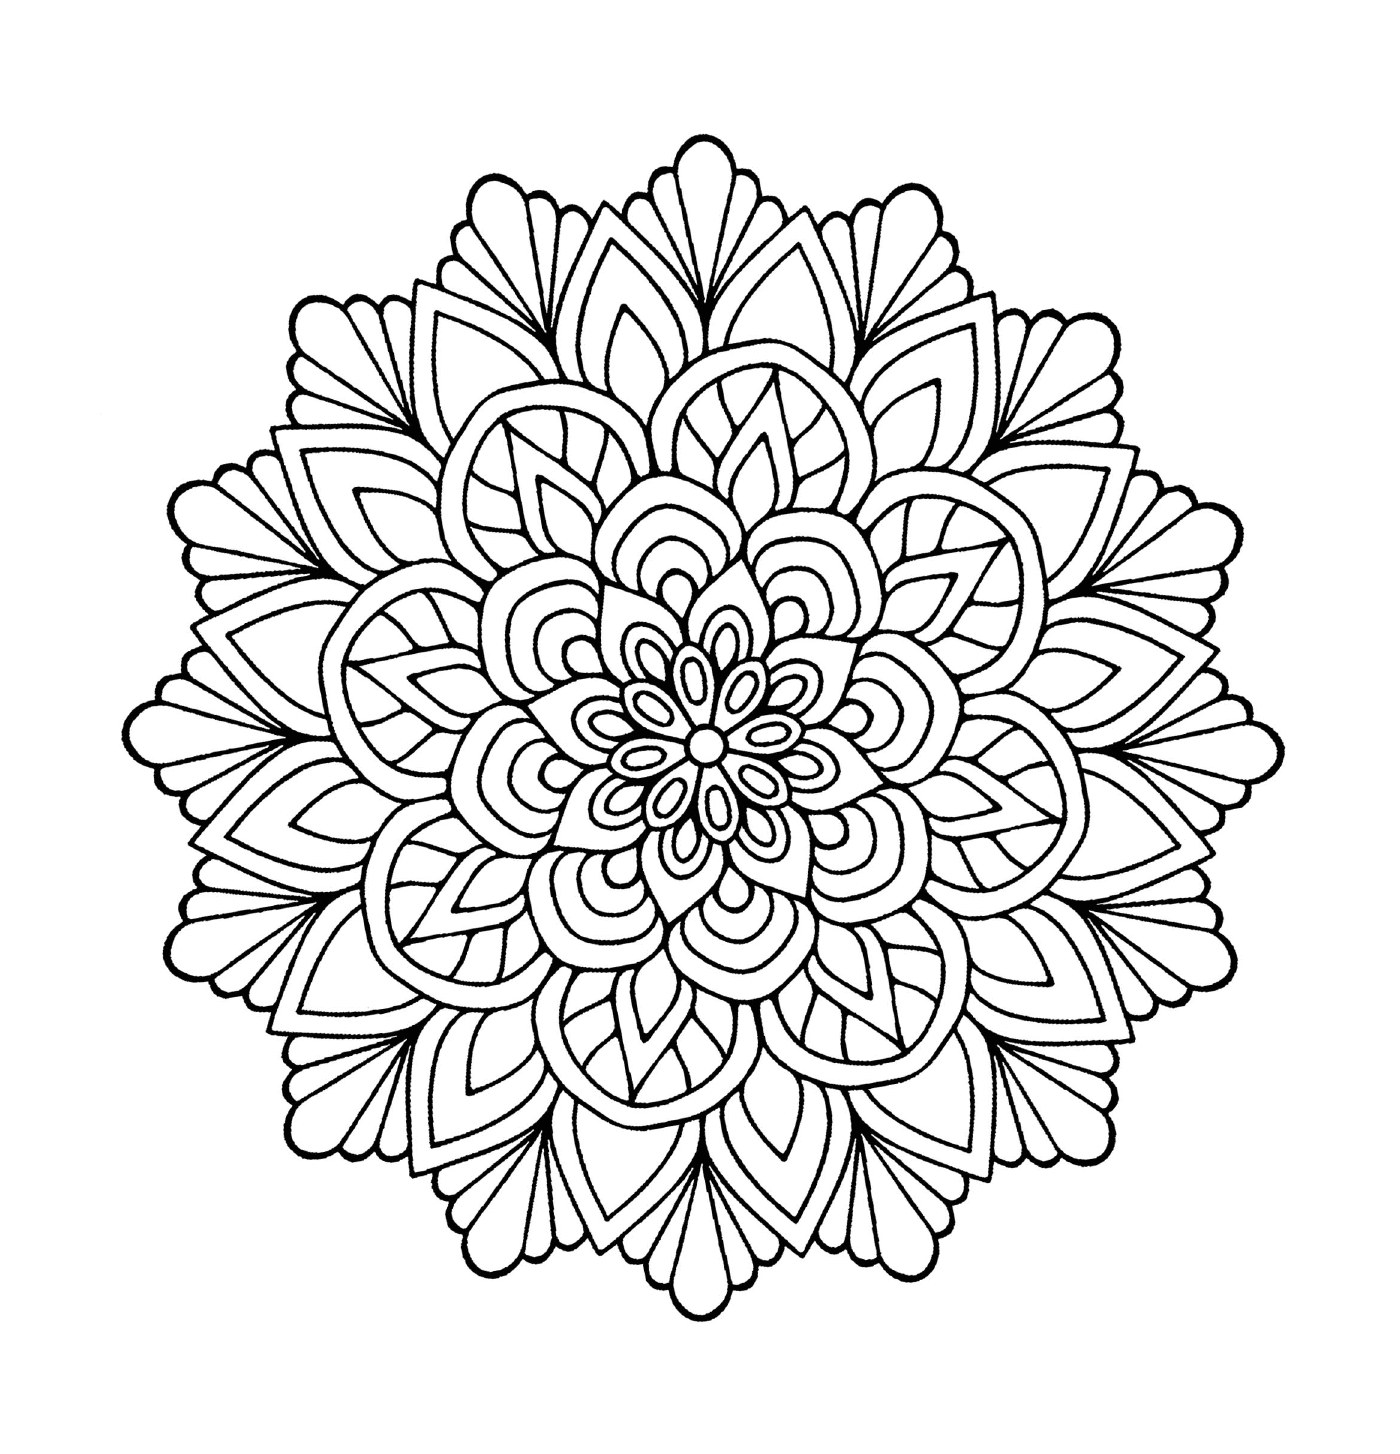  A floral mandala with leaves 